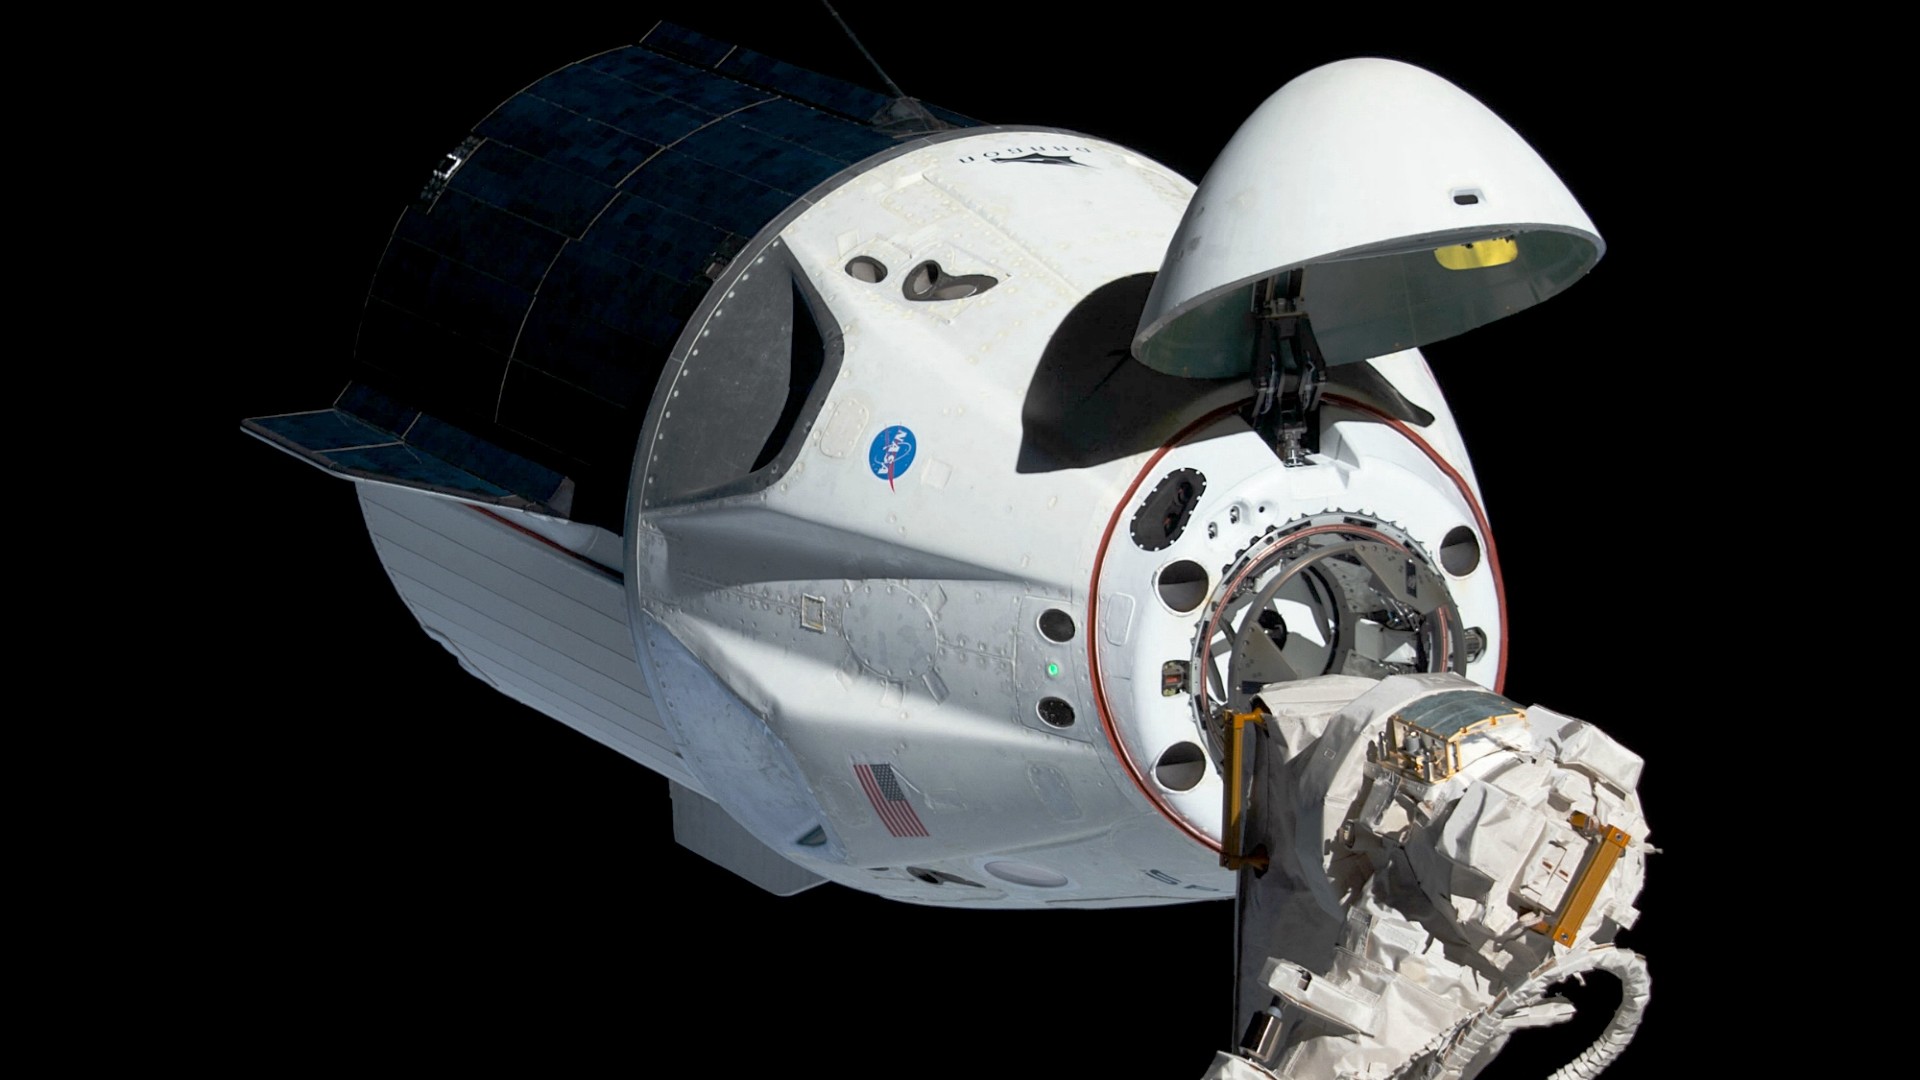 Axiom Space’s 3rd private mission will conduct pioneering microgravity experiments on ISS Space